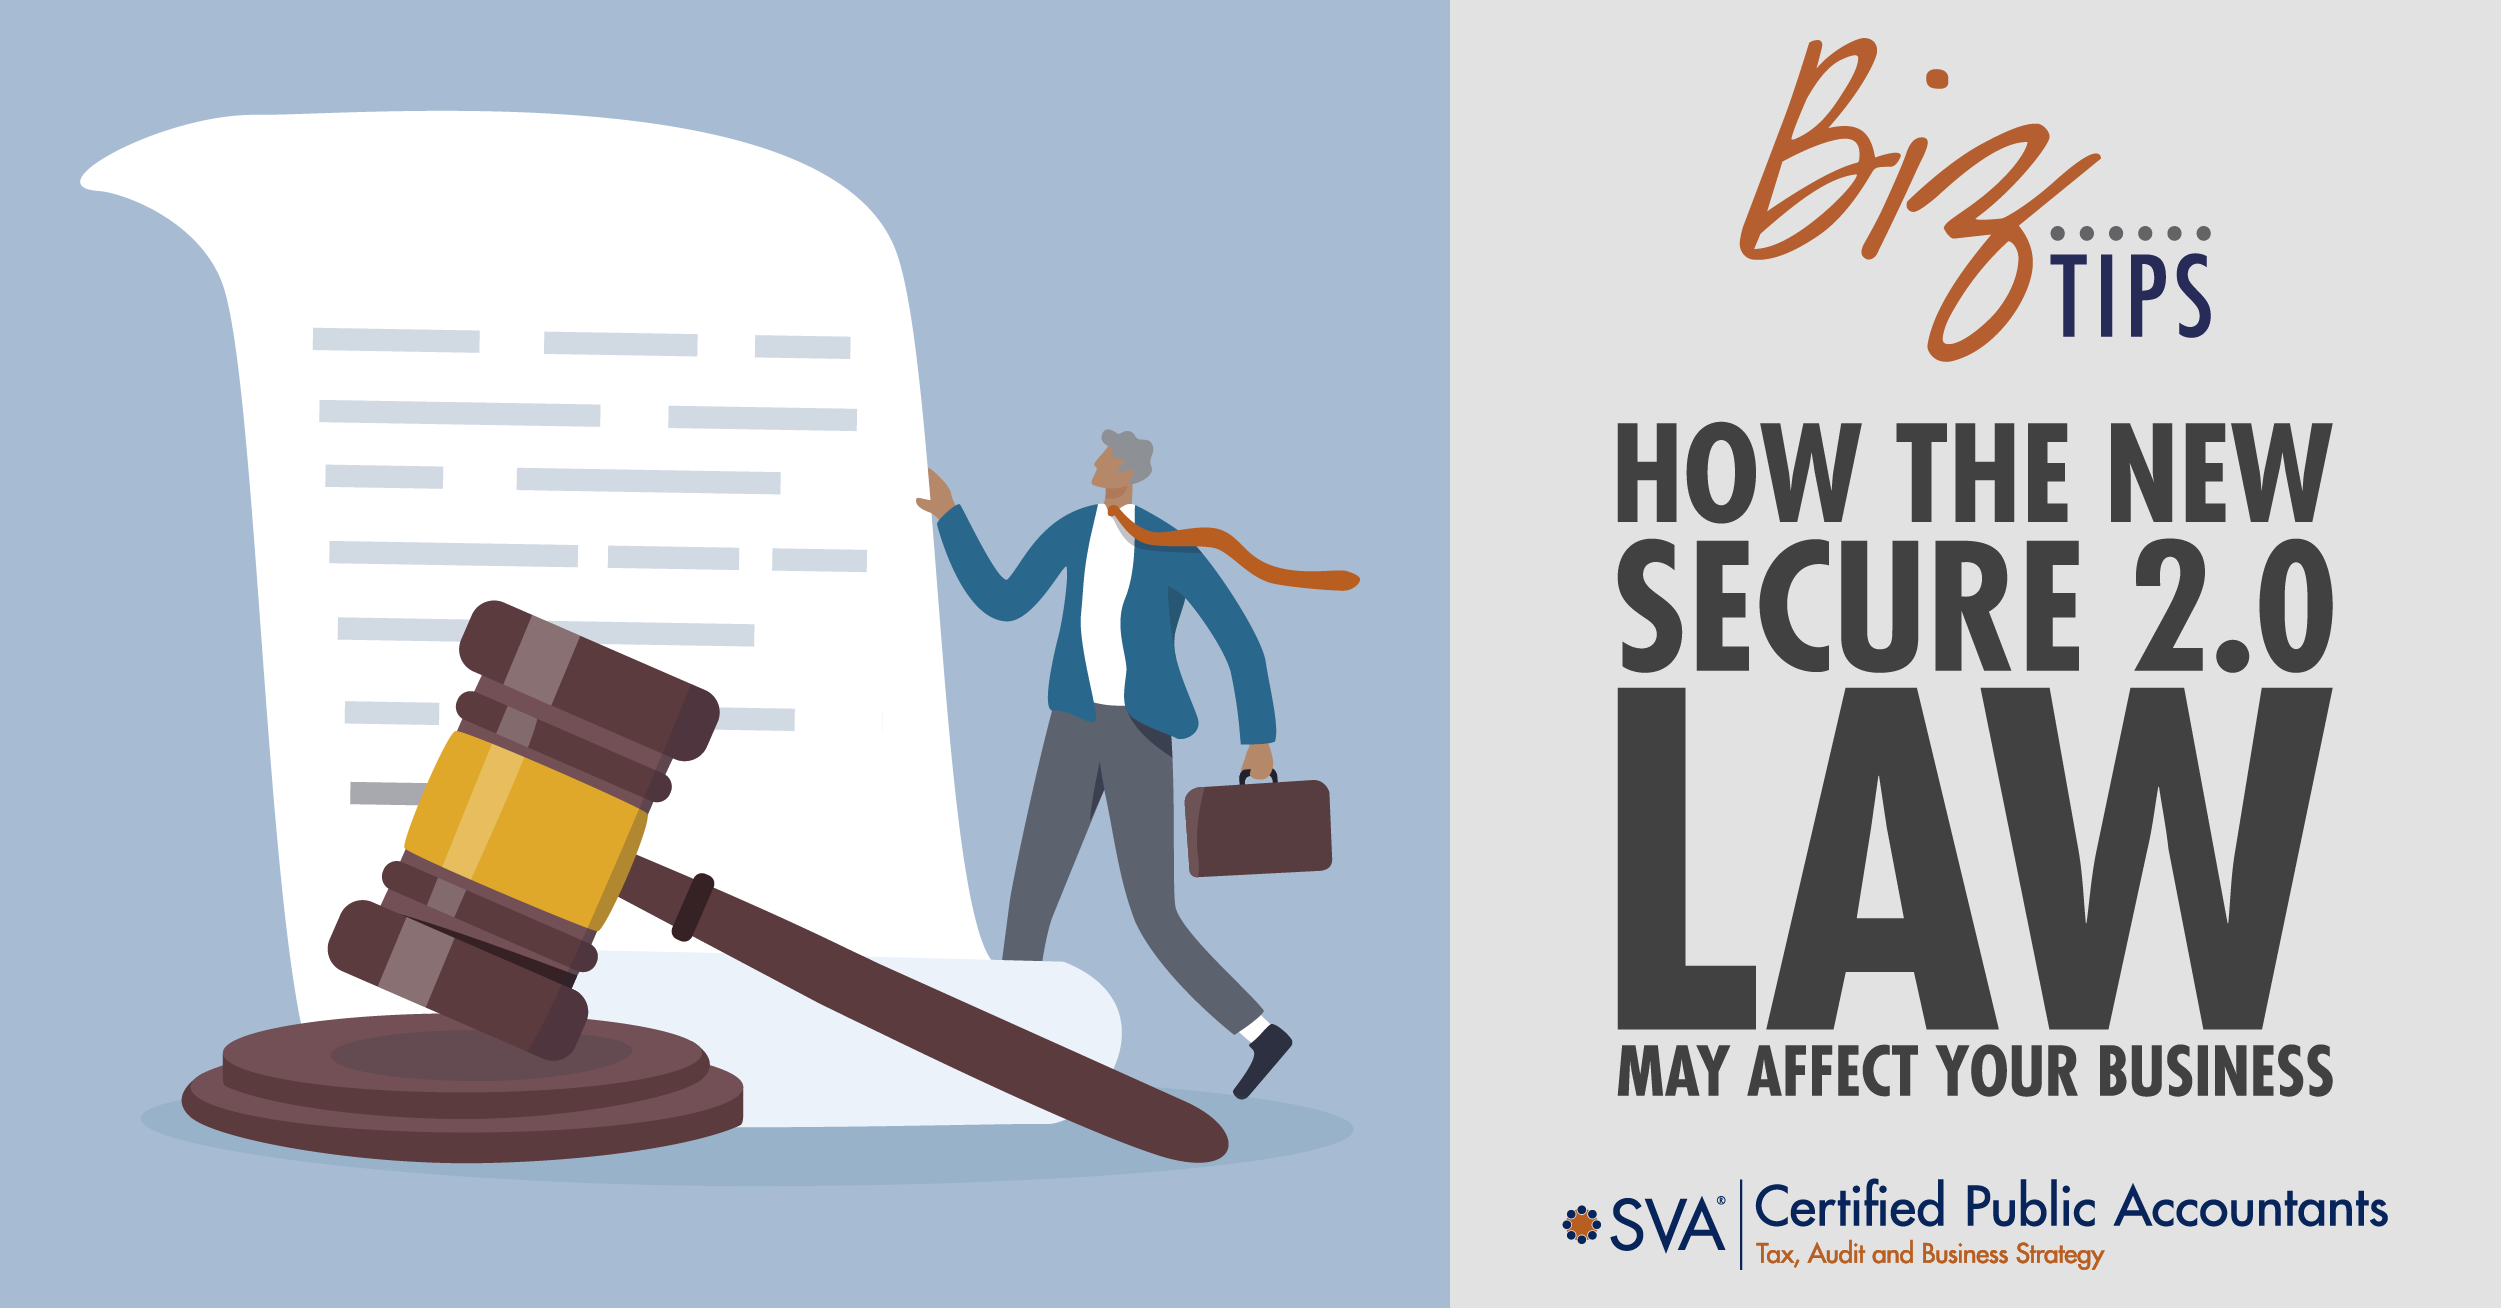 sva-certified-public-accountants-biz-tips-how-the-new-secure-2.0-law-may-affect-your-business